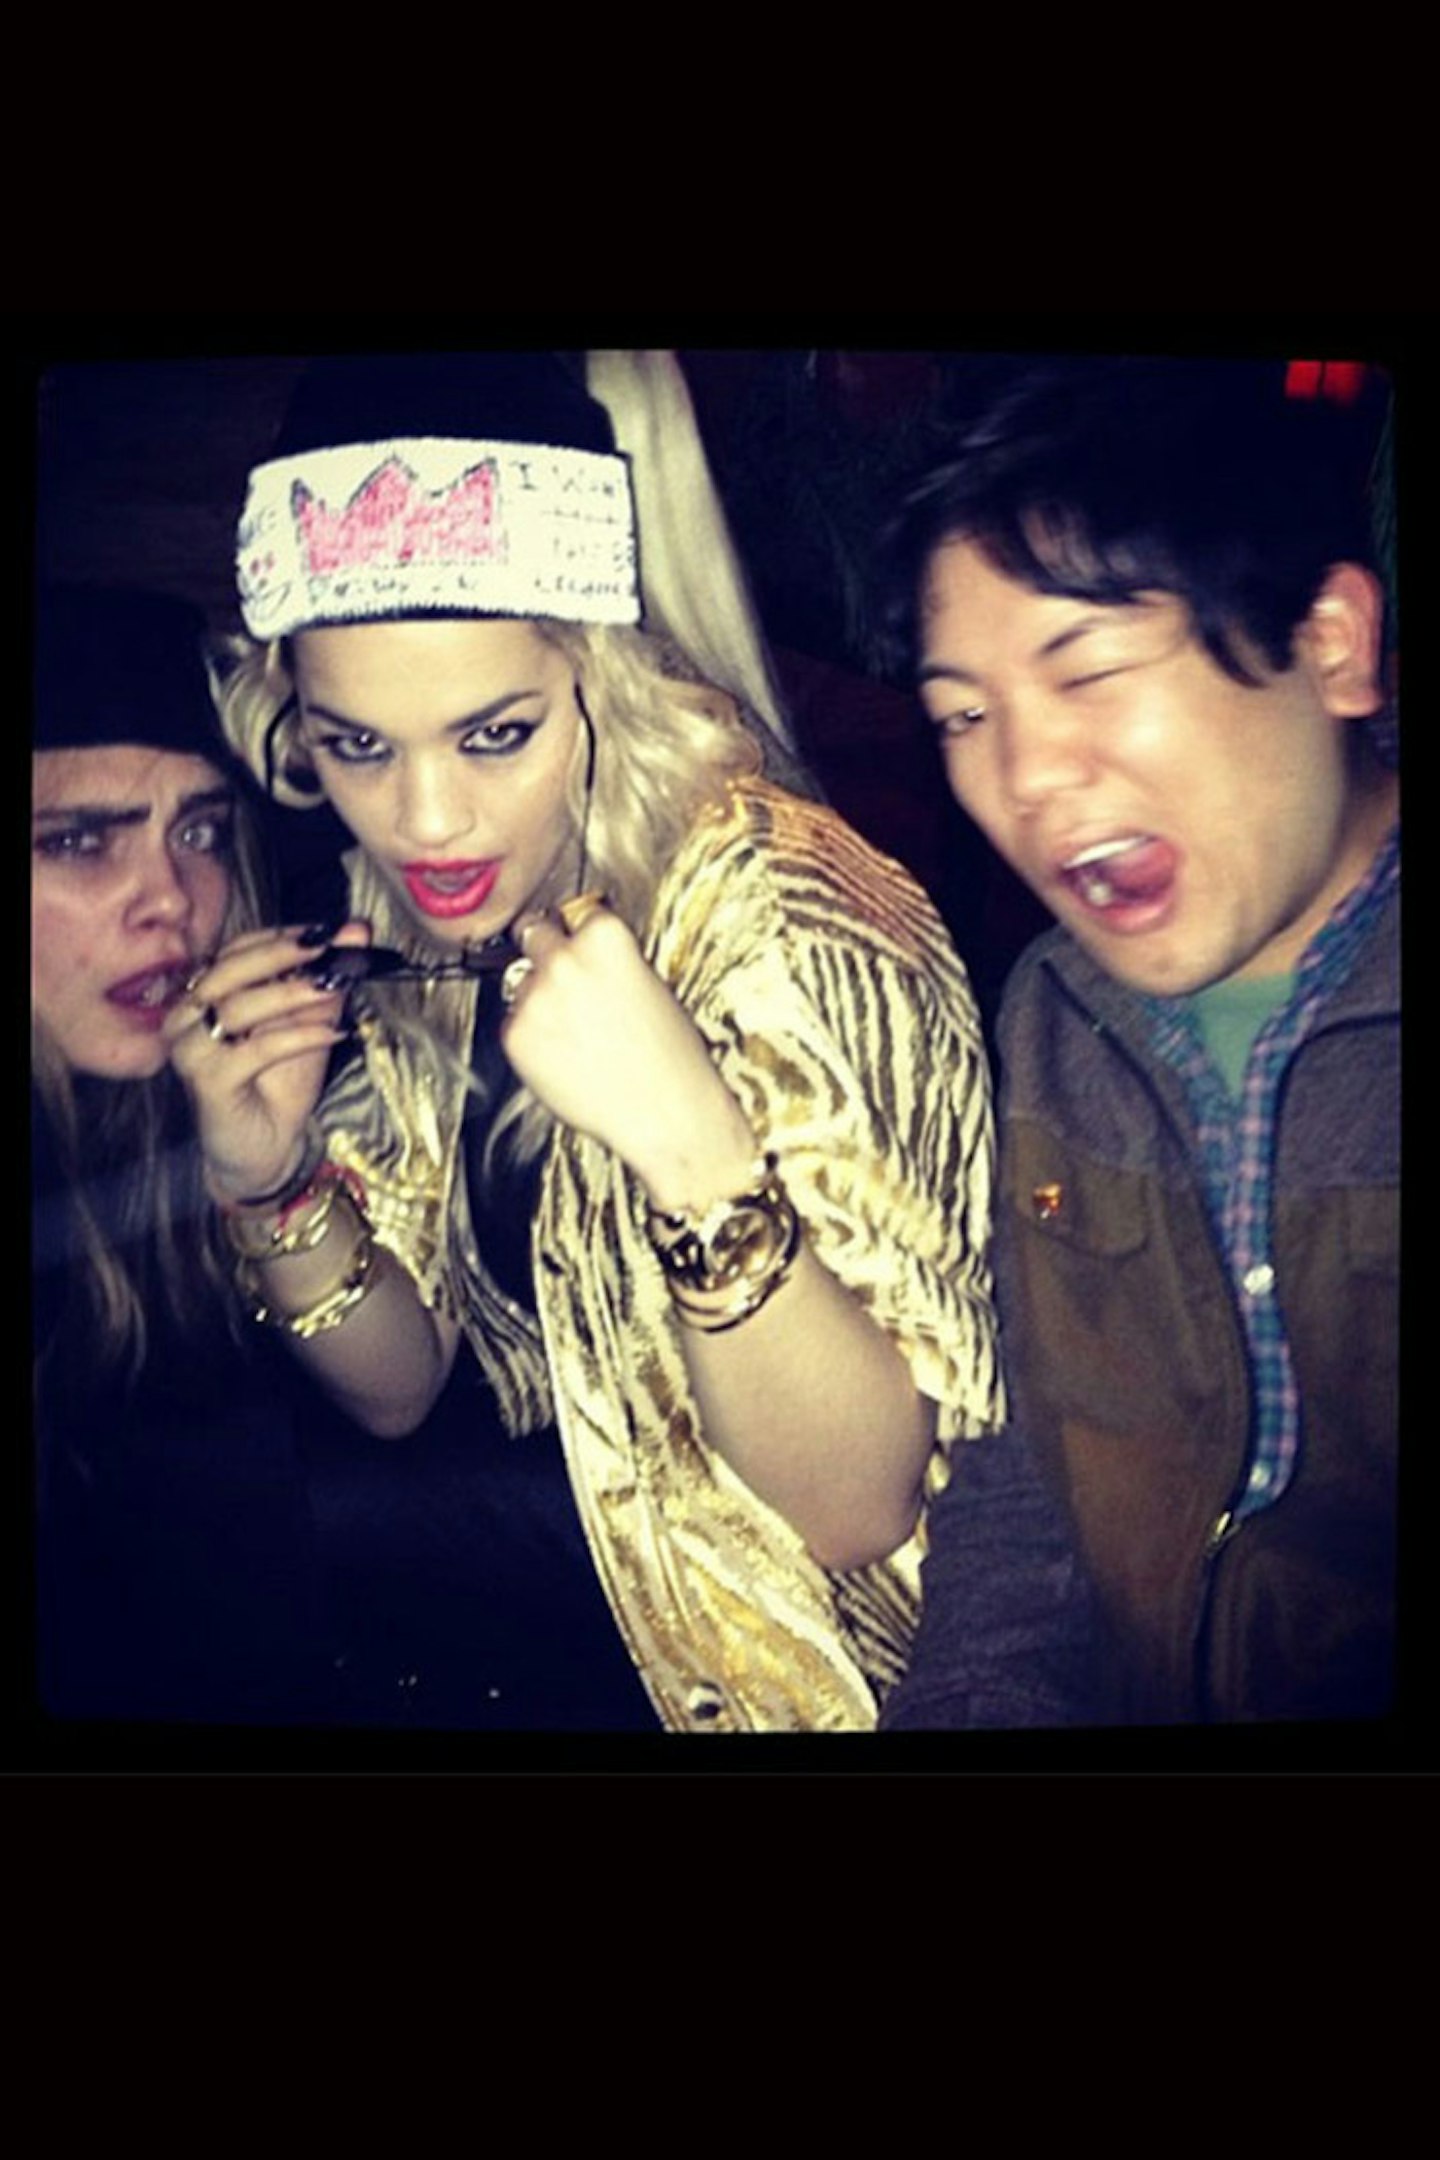 @RitaOra: 'I put a spell on you....and frank lol @caradelevingne'